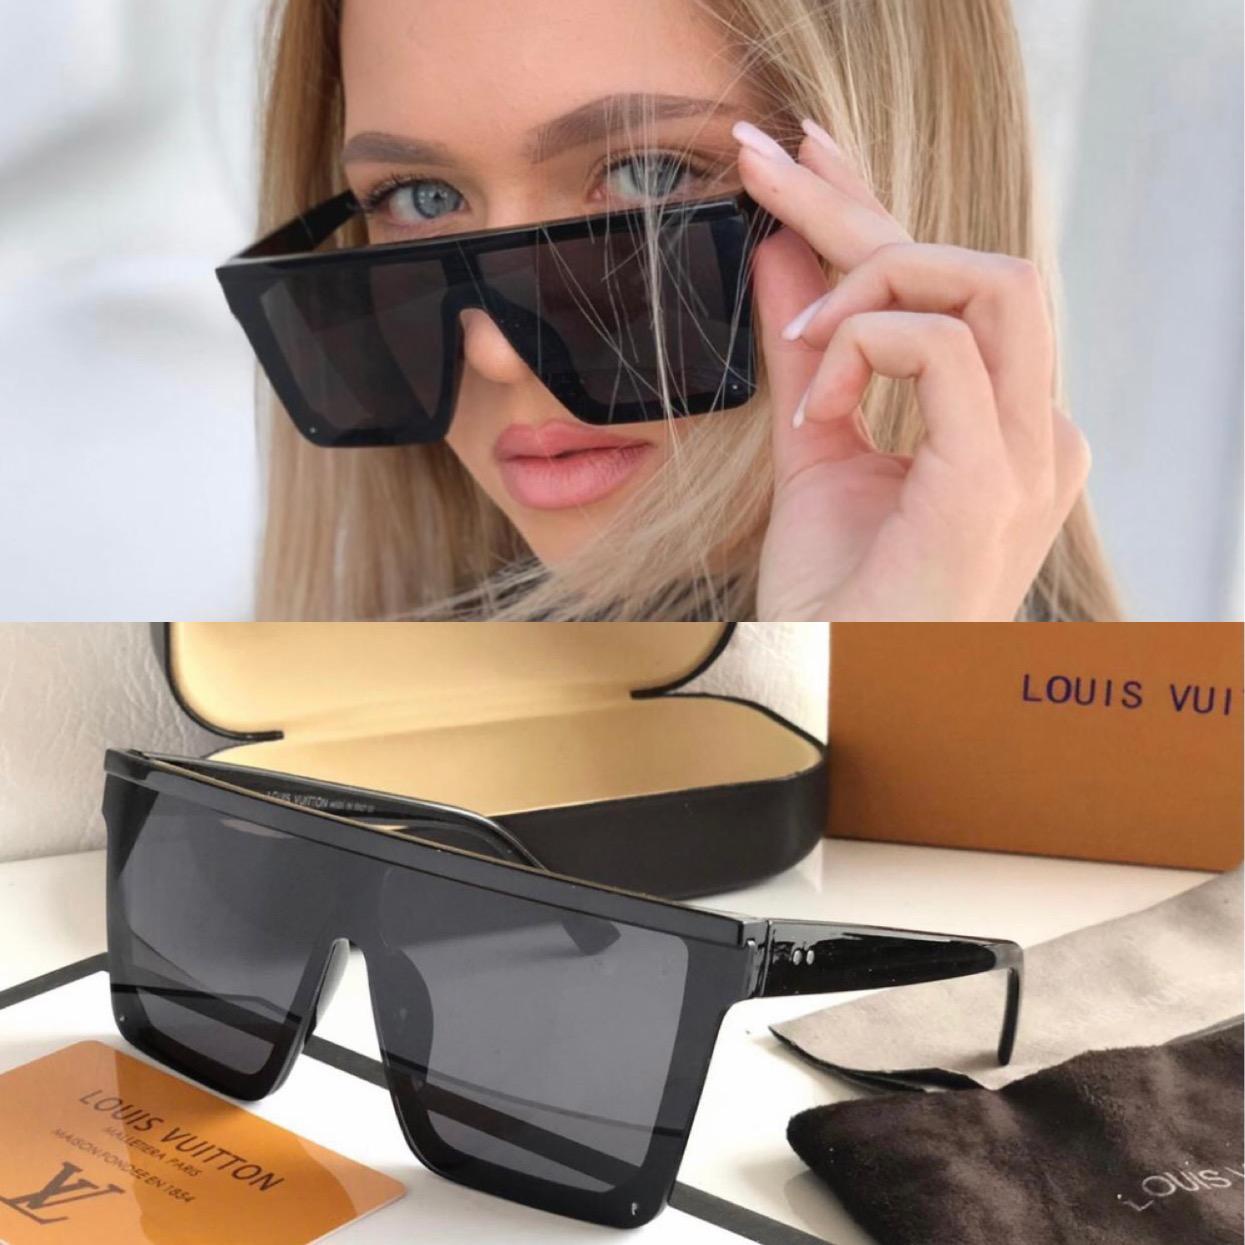 Louis Vuitton Branded Black Glass Men's and Women's Sunglass for Man and Woman or Girls LV-8569 Black Frame Unisex Gift Sunglass